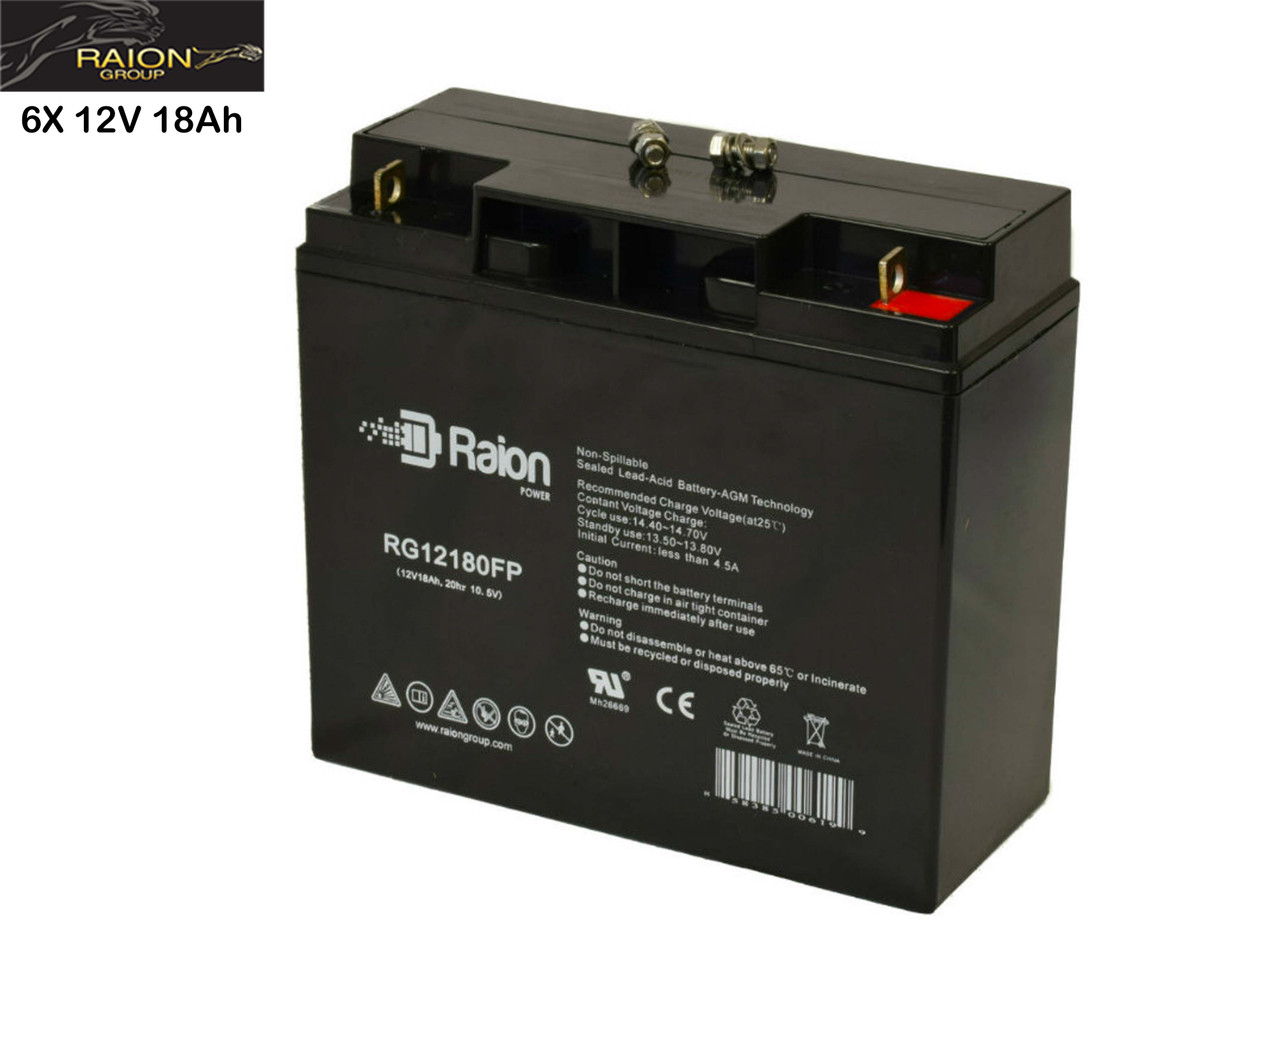 Raion Power Replacement 12V 18Ah Battery for Riders Solutions Cruiser - 6 Pack